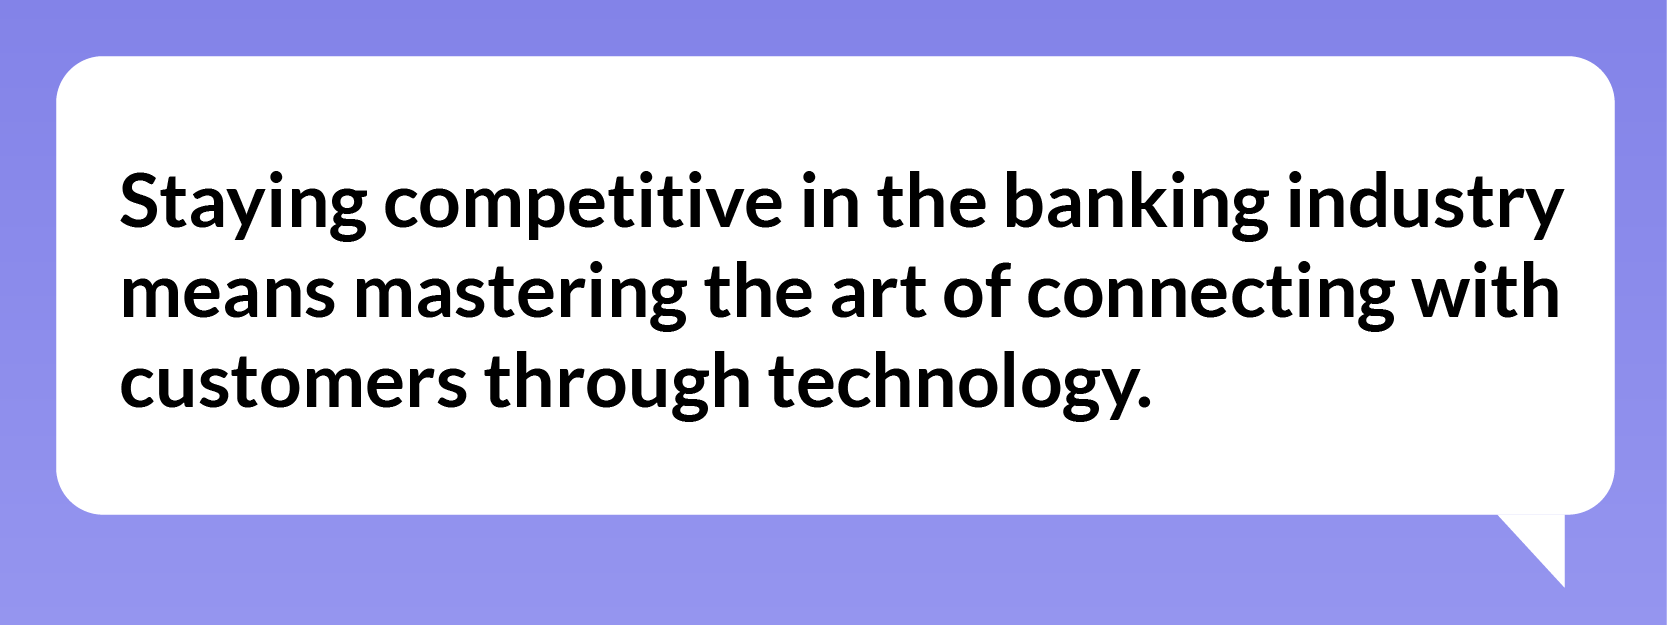 How to stay competitive in the digital banking industry